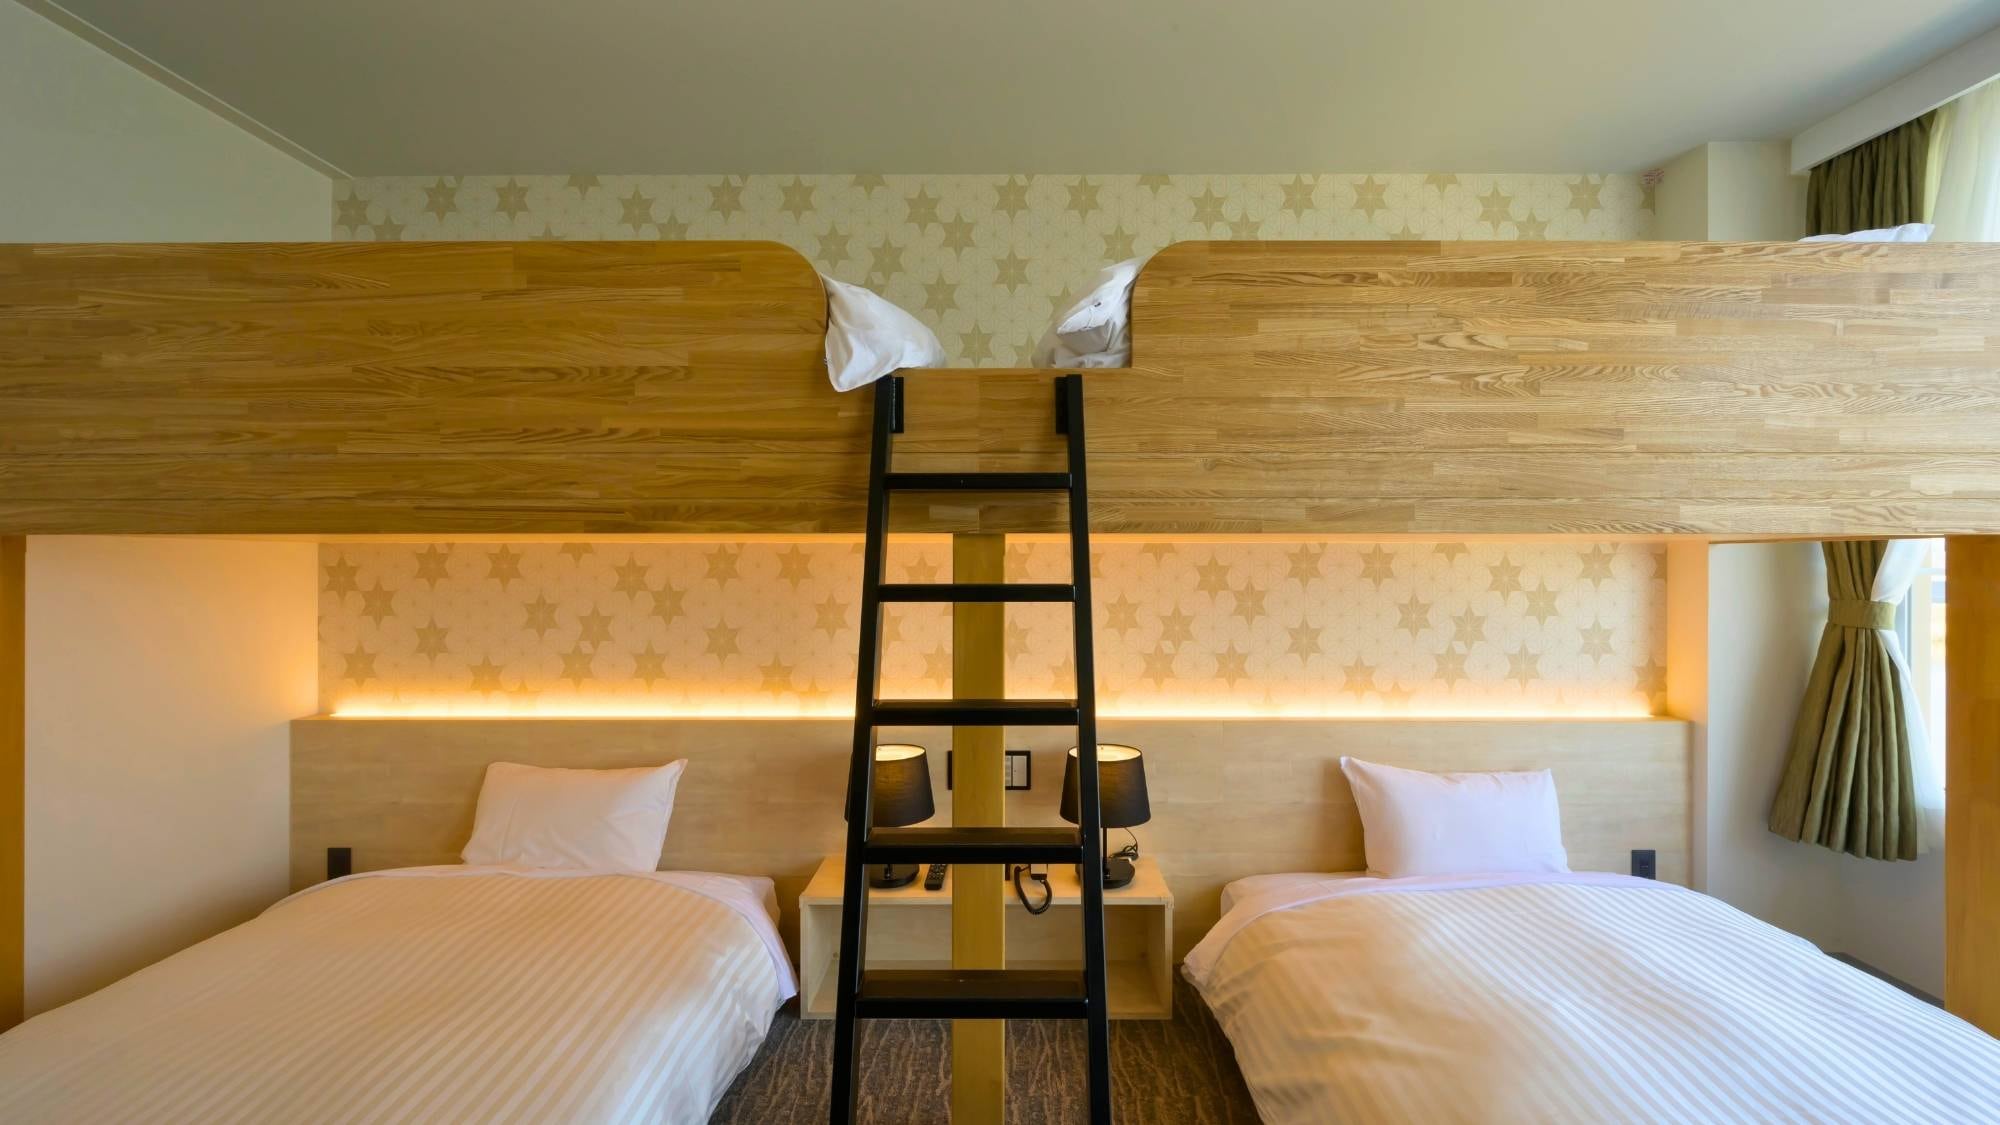 bed space. Up to 4 people can sleep, 2 people in the loft and 2 people under the loft.